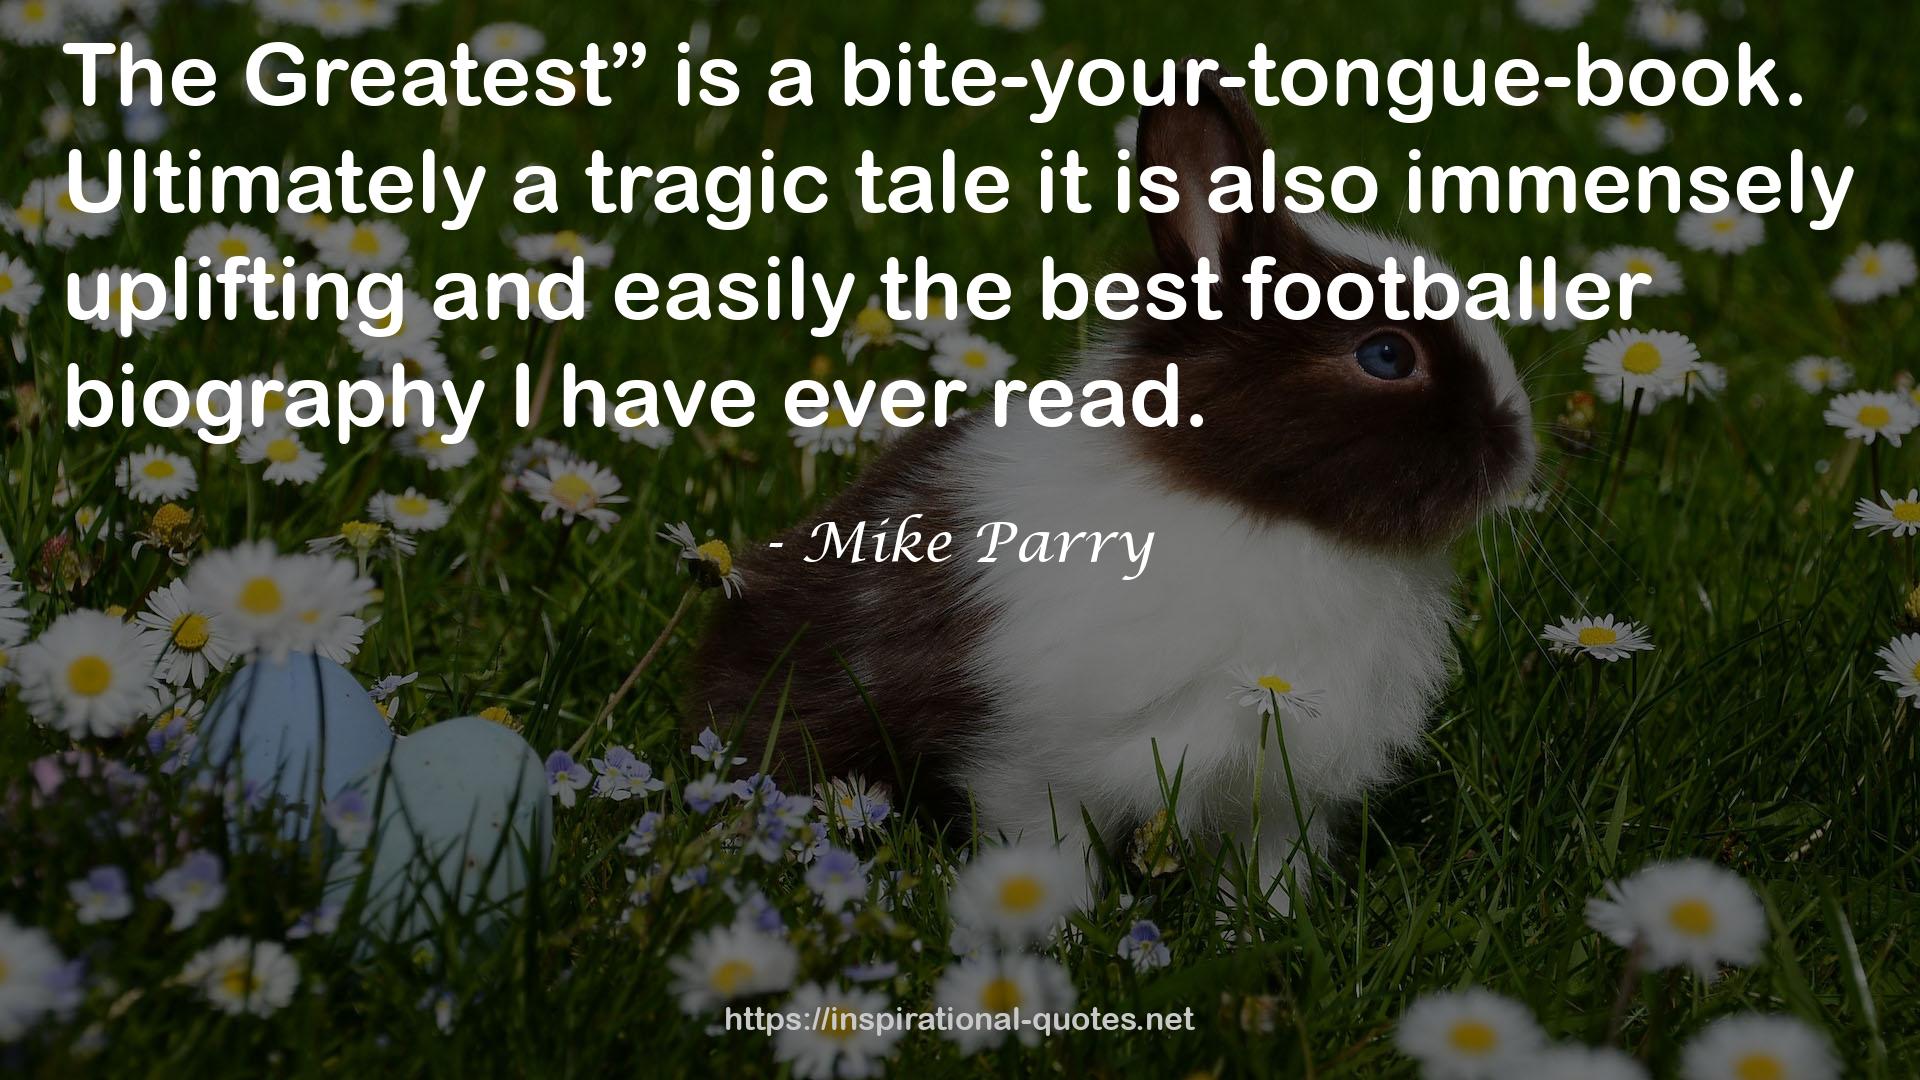 Mike Parry QUOTES